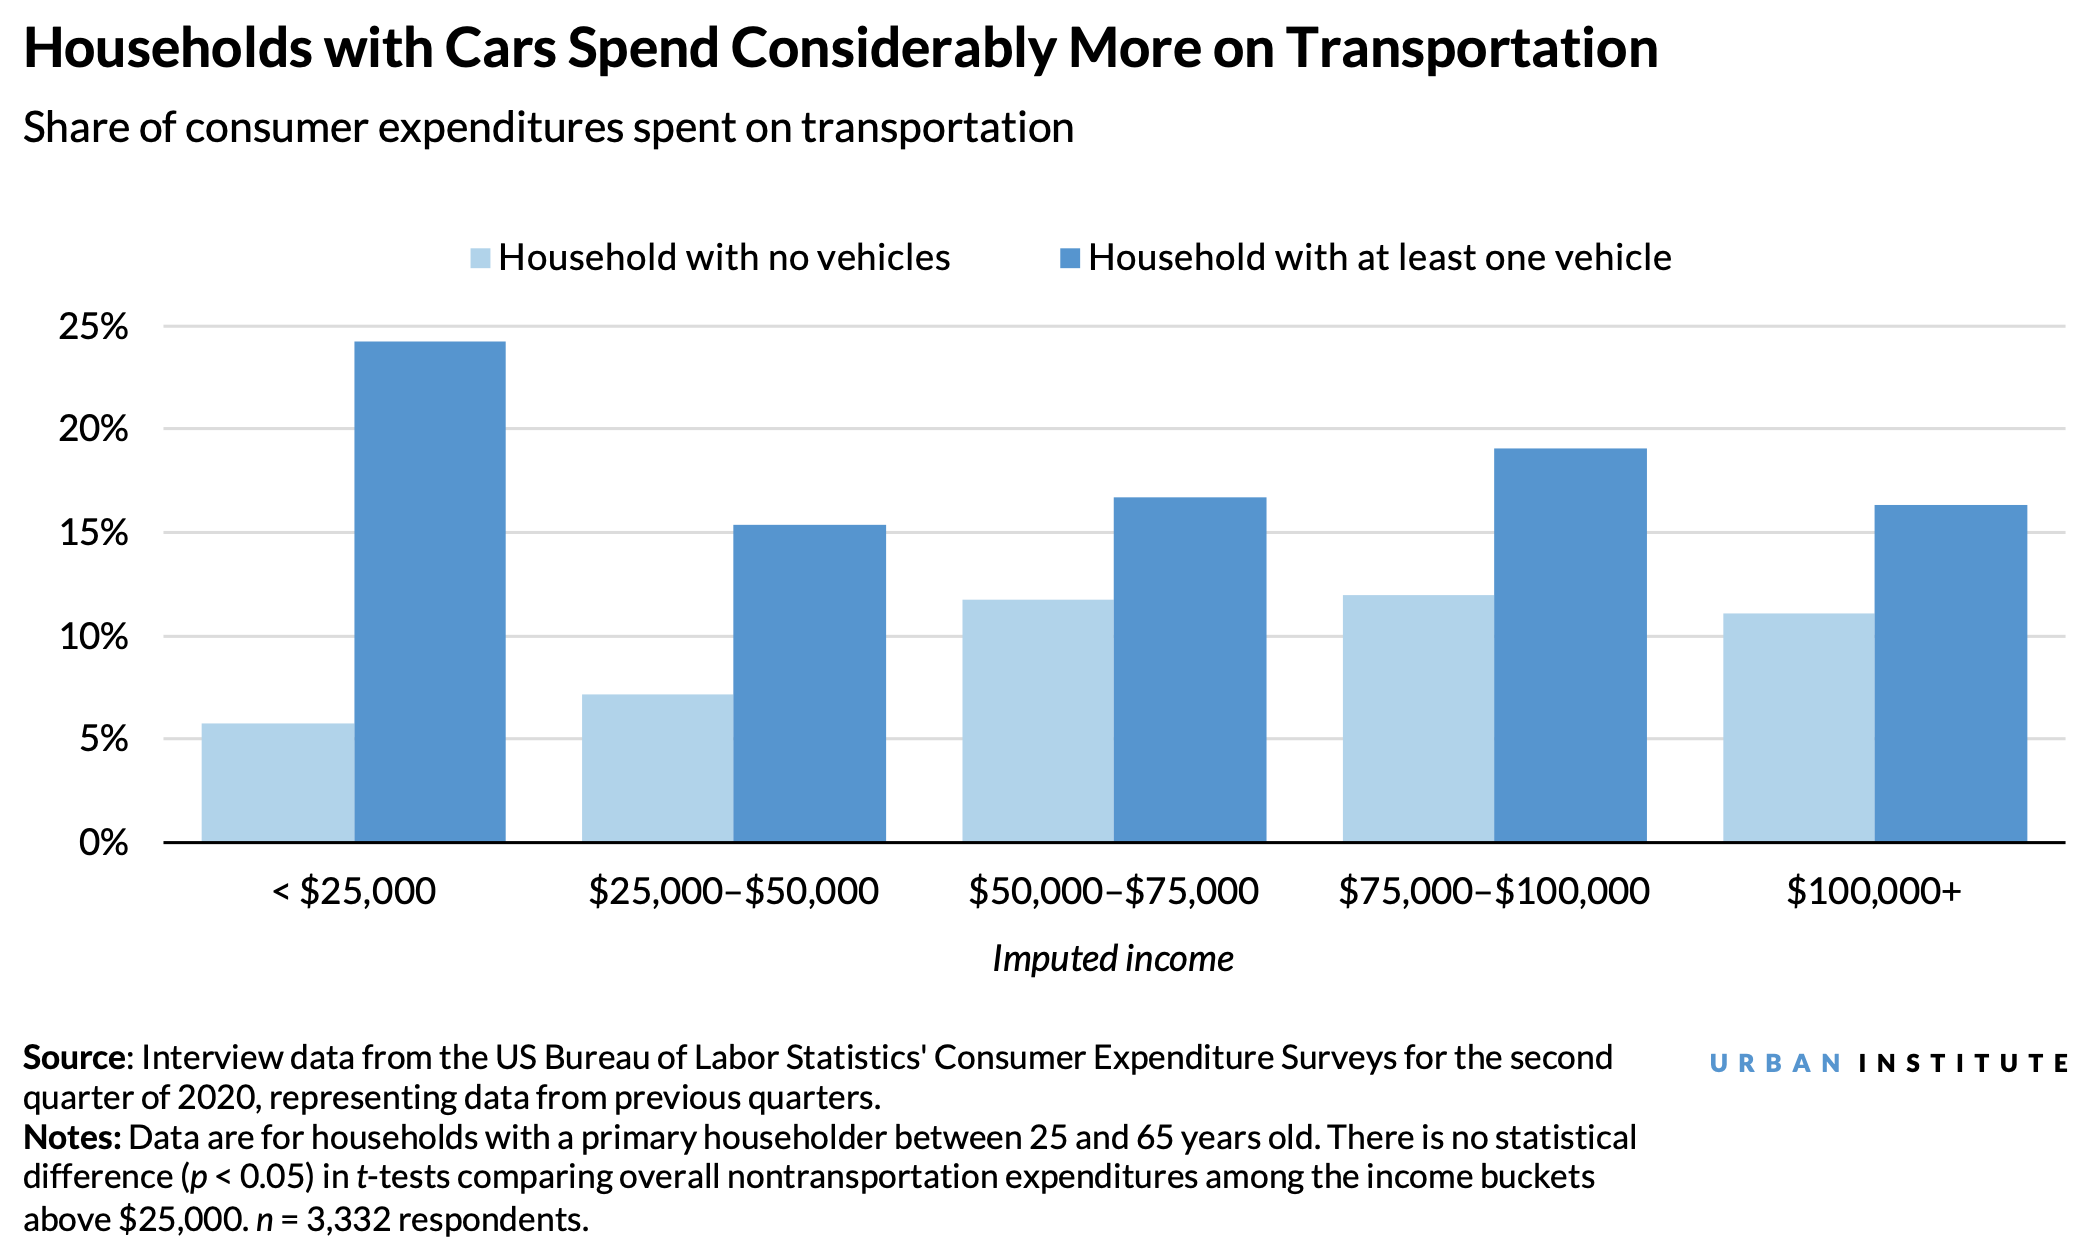 Bar graph showing households with cars spend considerably more on transportation